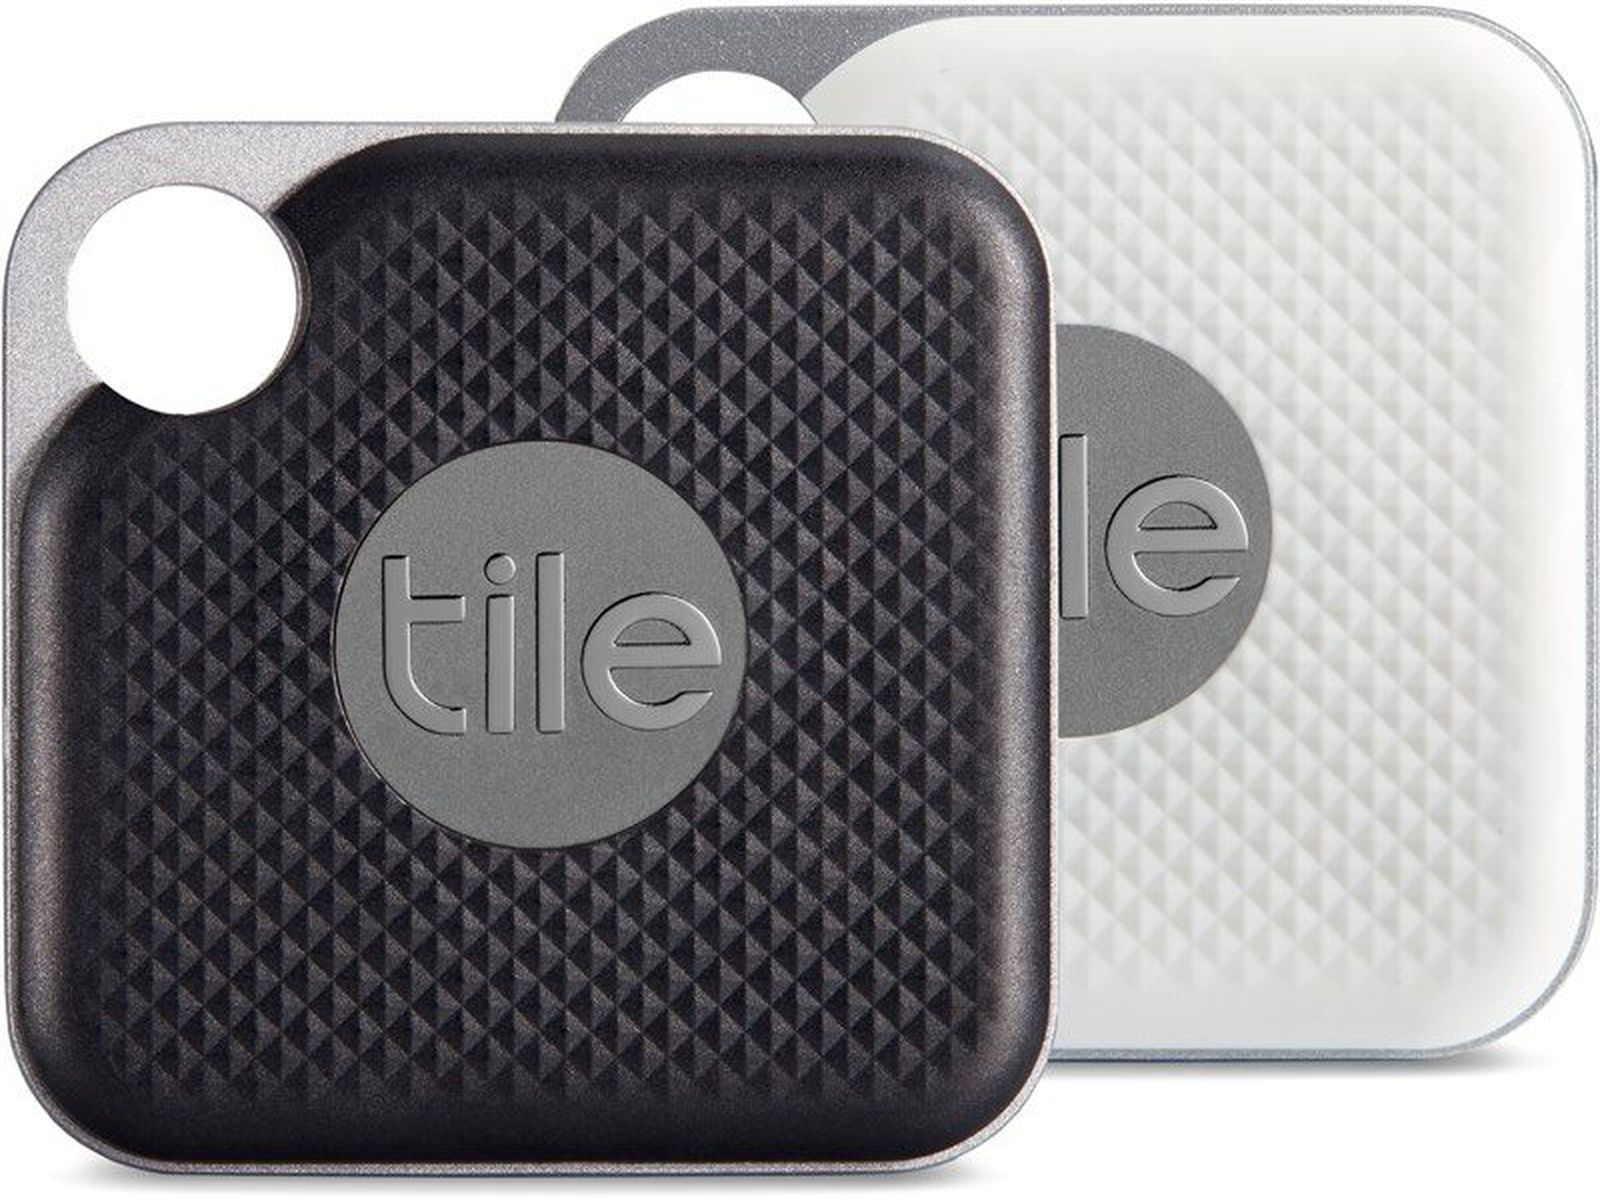 Tile Mate and Pro review: Replaceable batteries are a big improvement